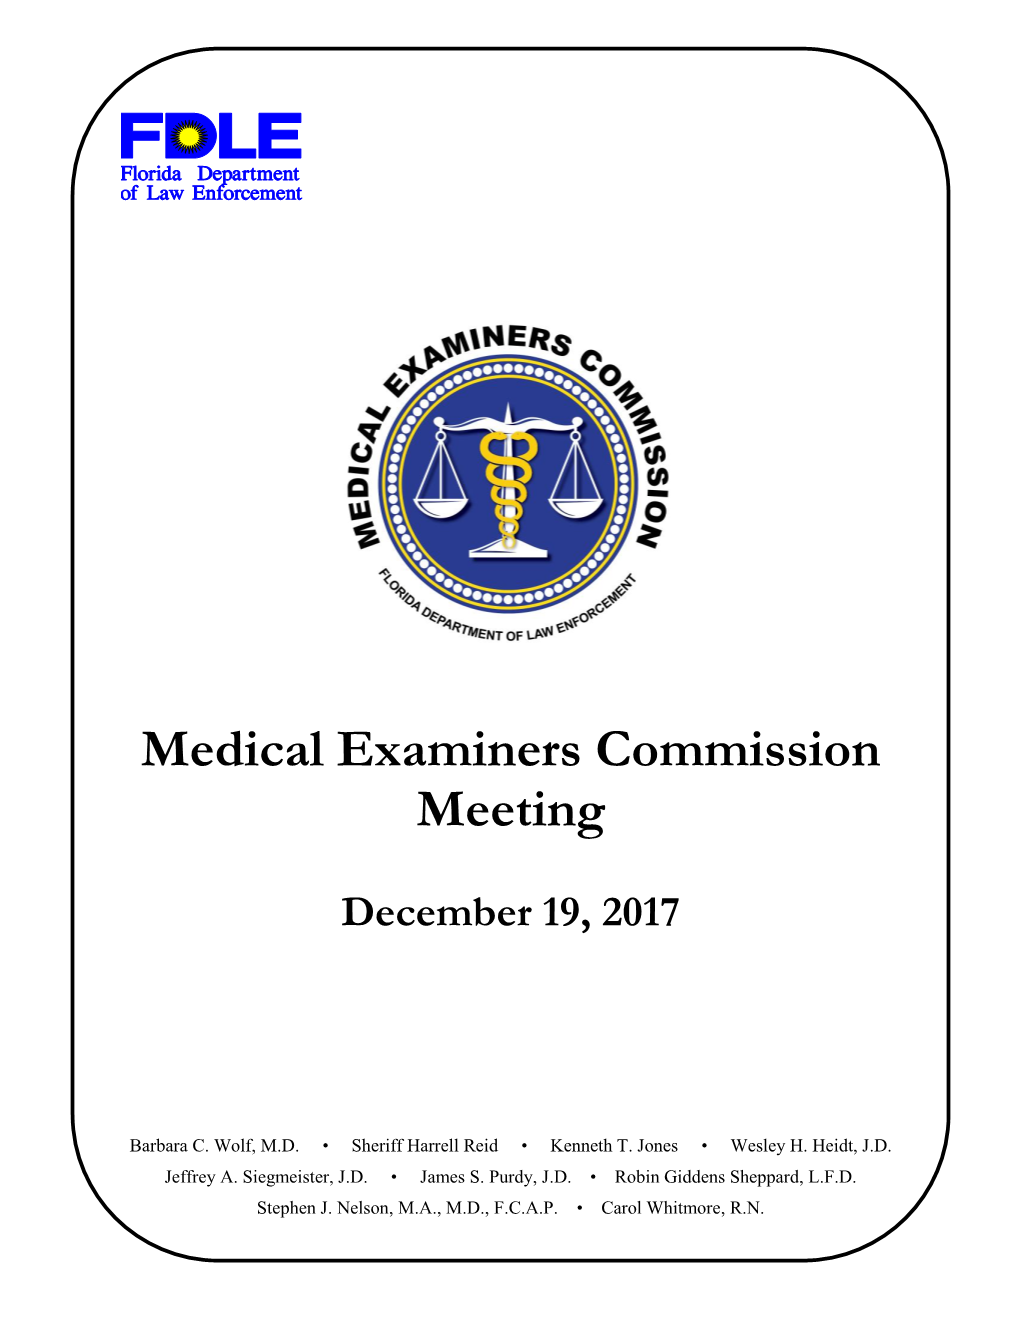 Medical Examiners Commission Meeting December 19, 2017